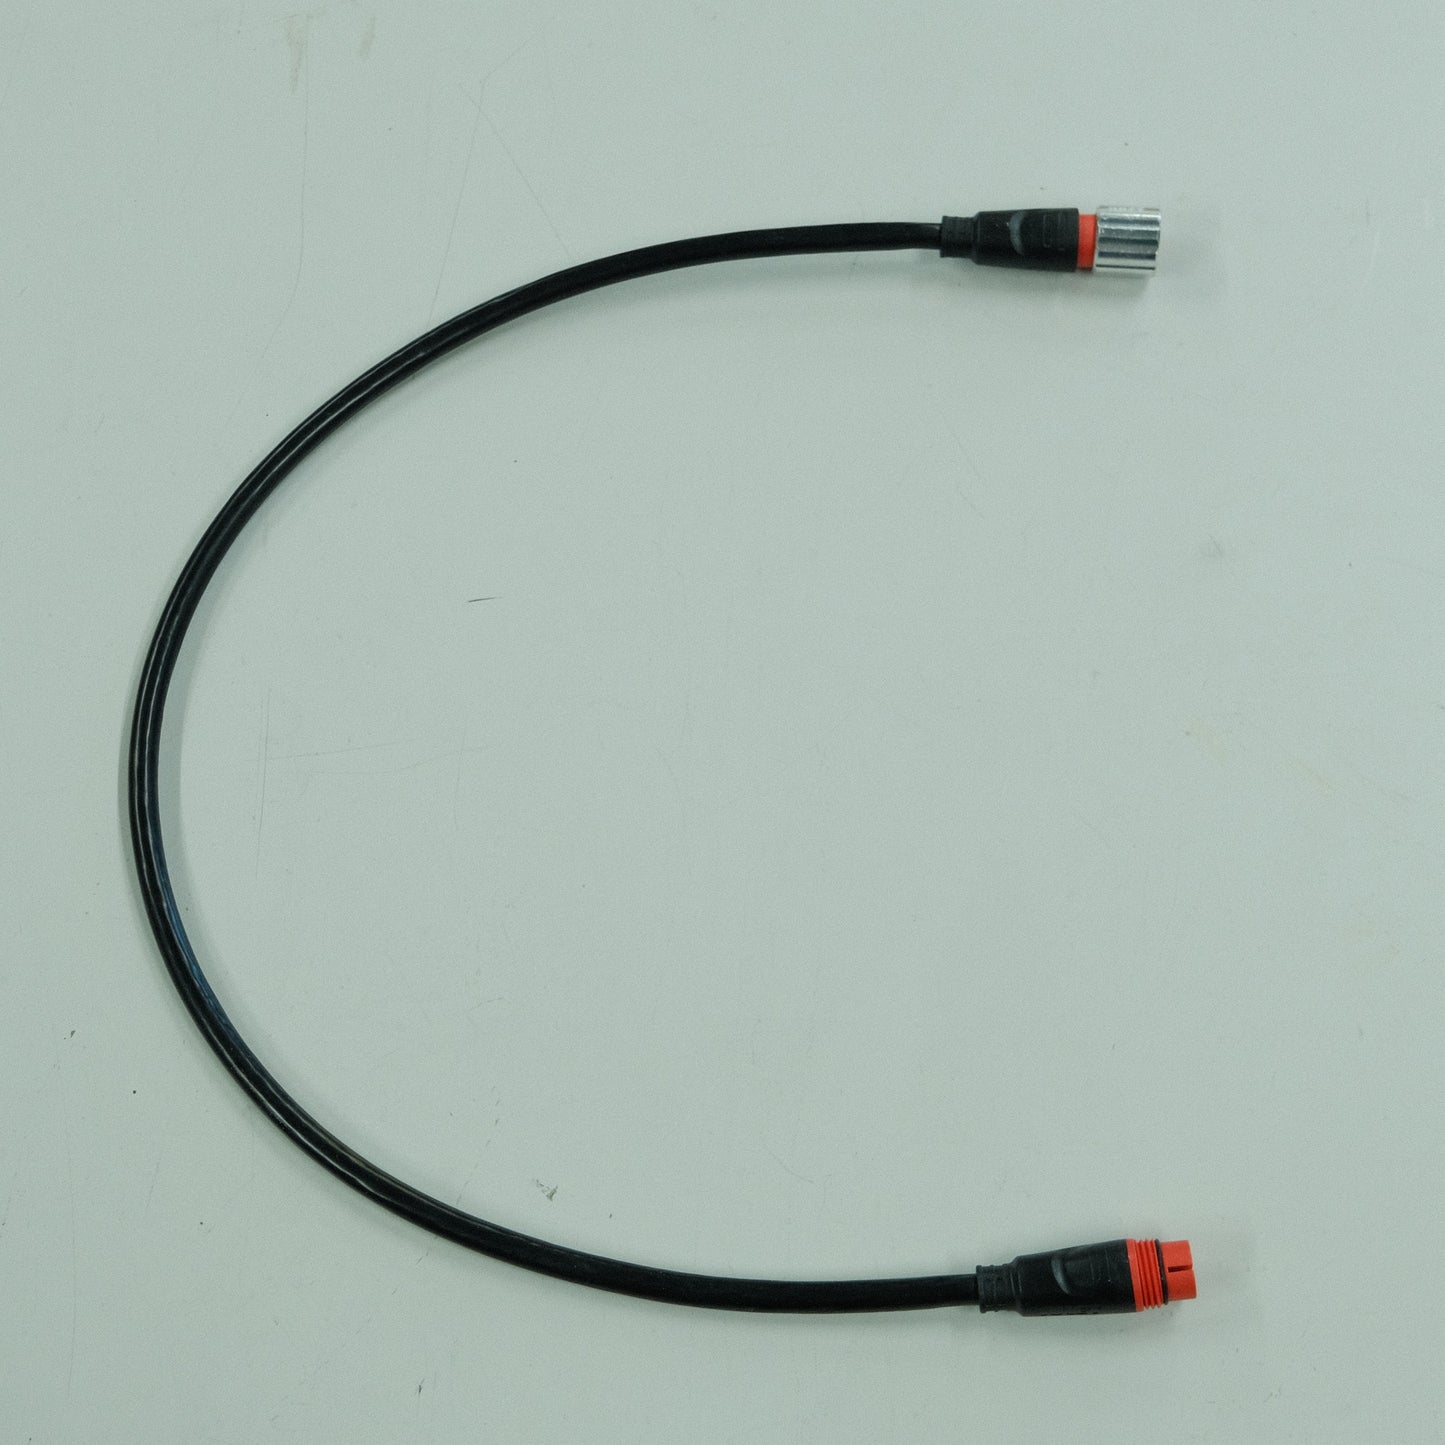 Motor Extension Cable - L1121 (Red Screw-on High Current) - Julet